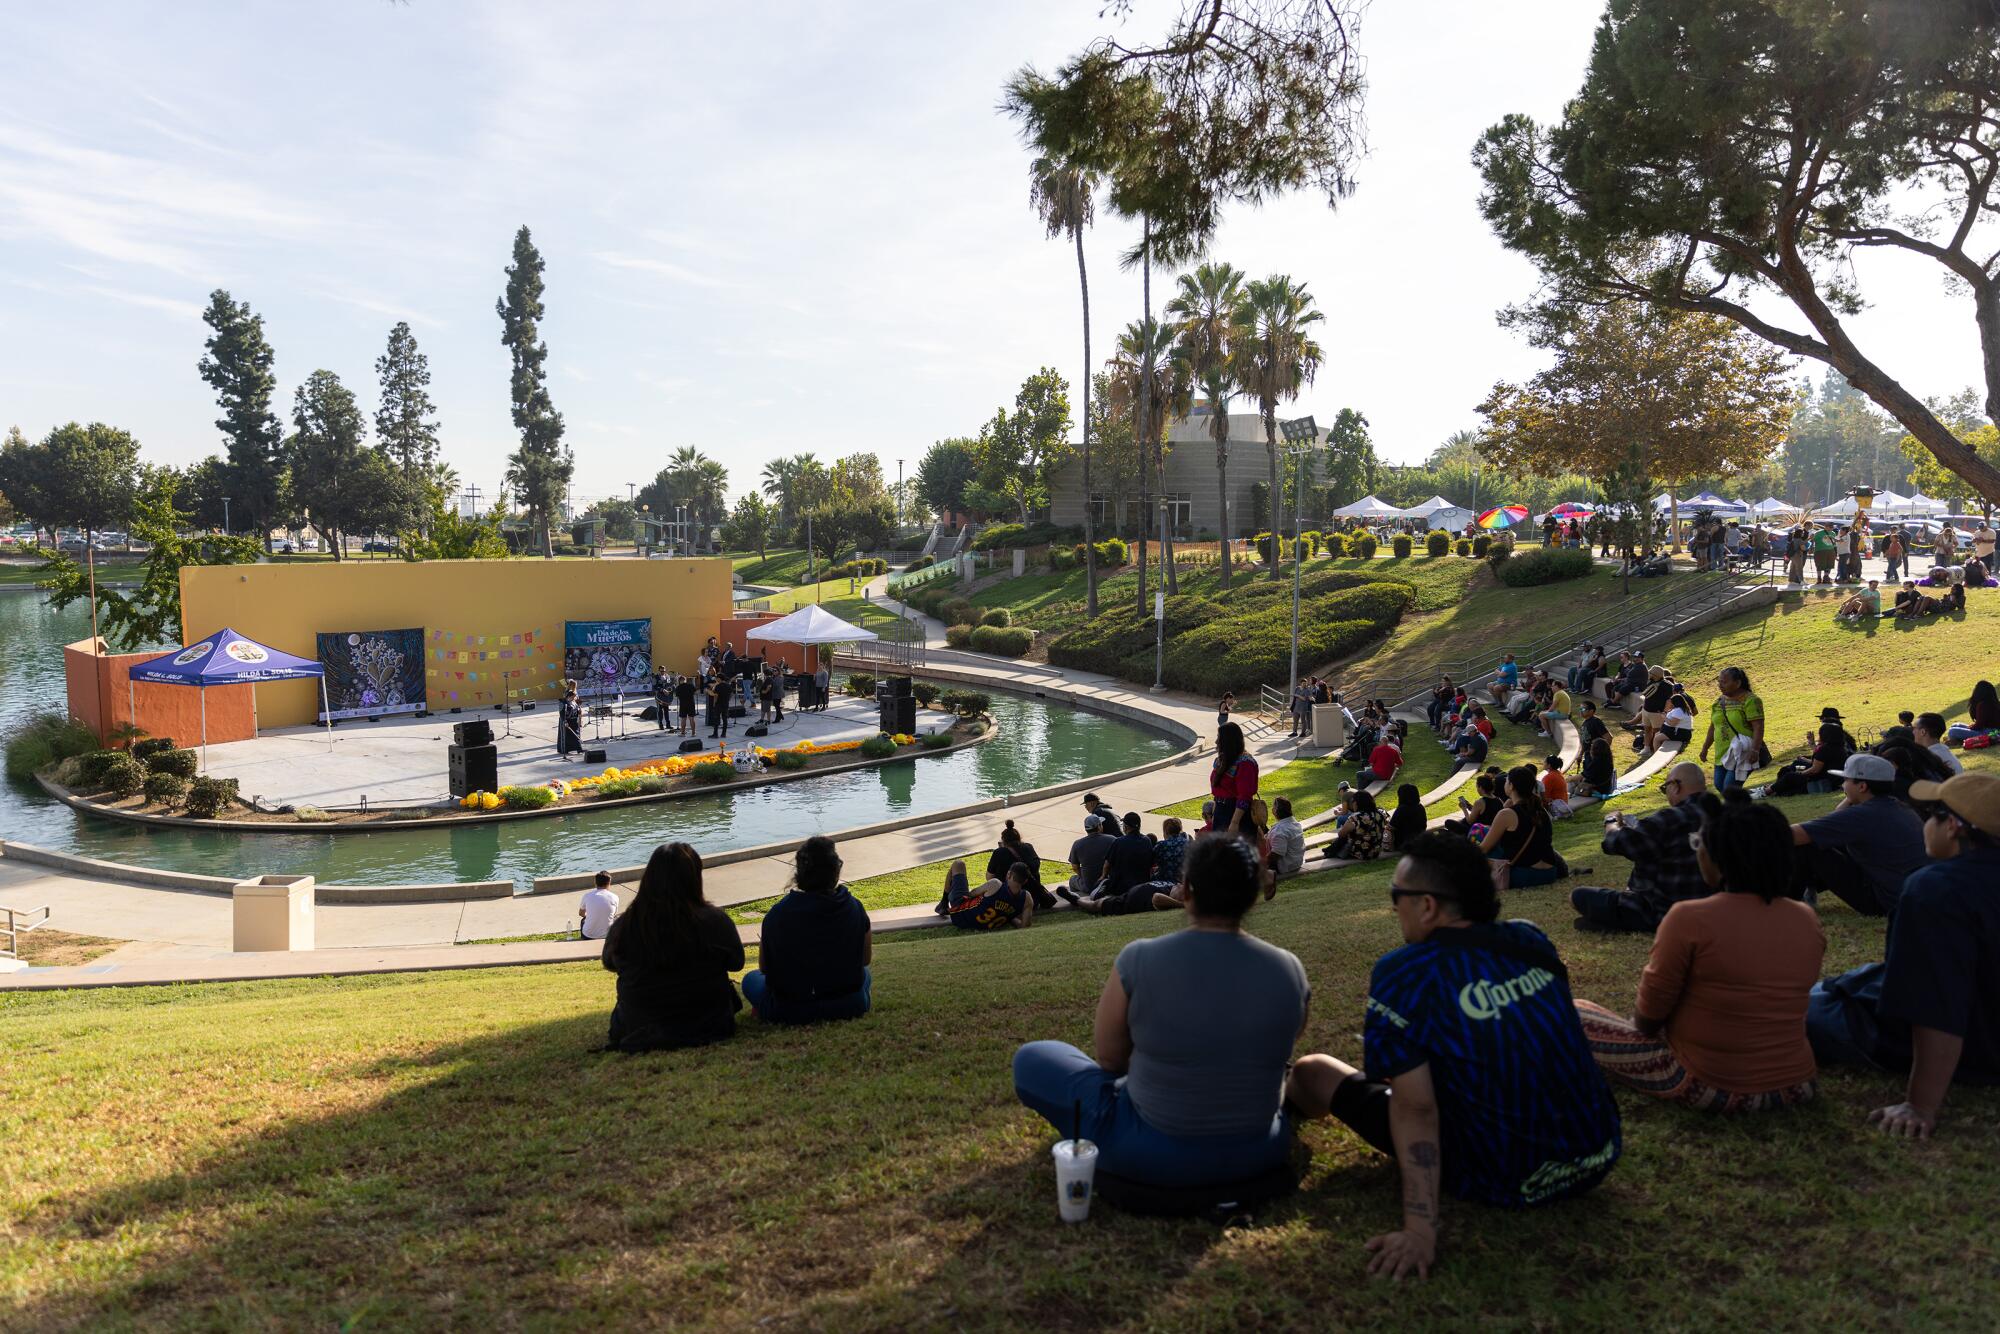 People sit on grassy hills around a stage, watching a performance in a park.